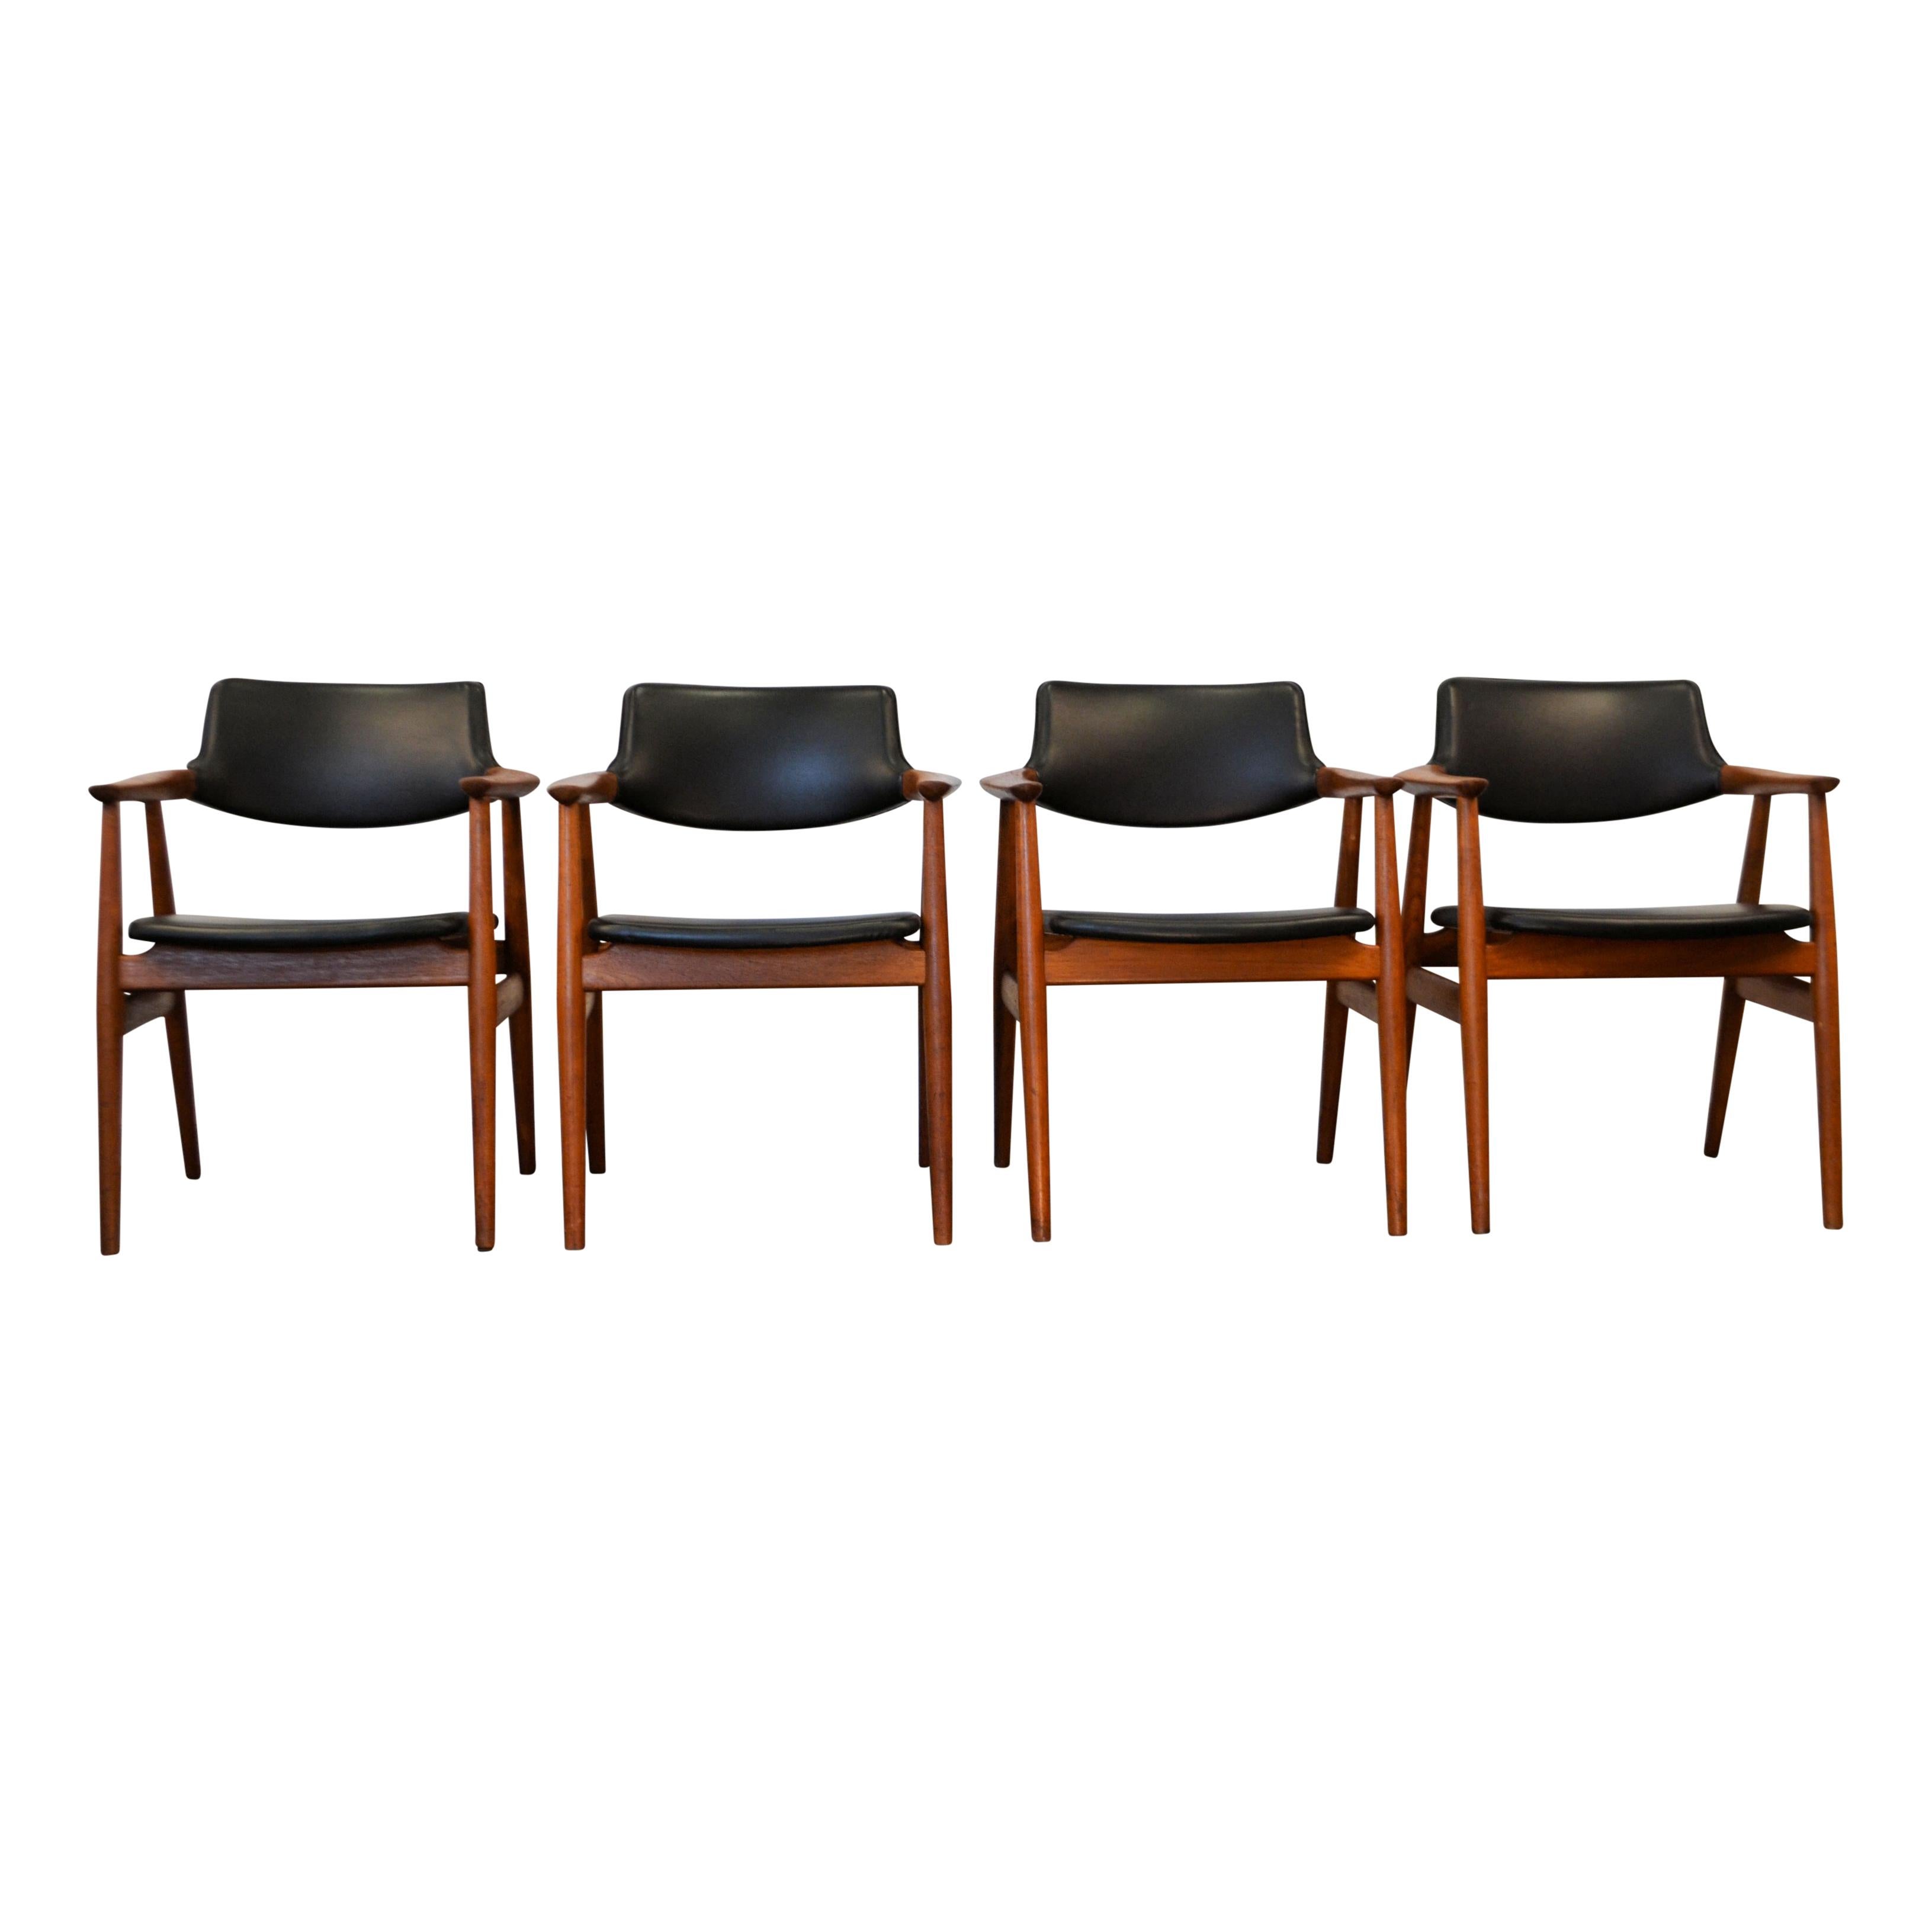 Set of four vintage teak dining chairs with armrests designed by Svend Aage Eriksen for Glostrup Møbelfabrik. These comfortable chairs feature a stylish typical simplistic vintage Danish design. The Skai leather seats complement a variety of